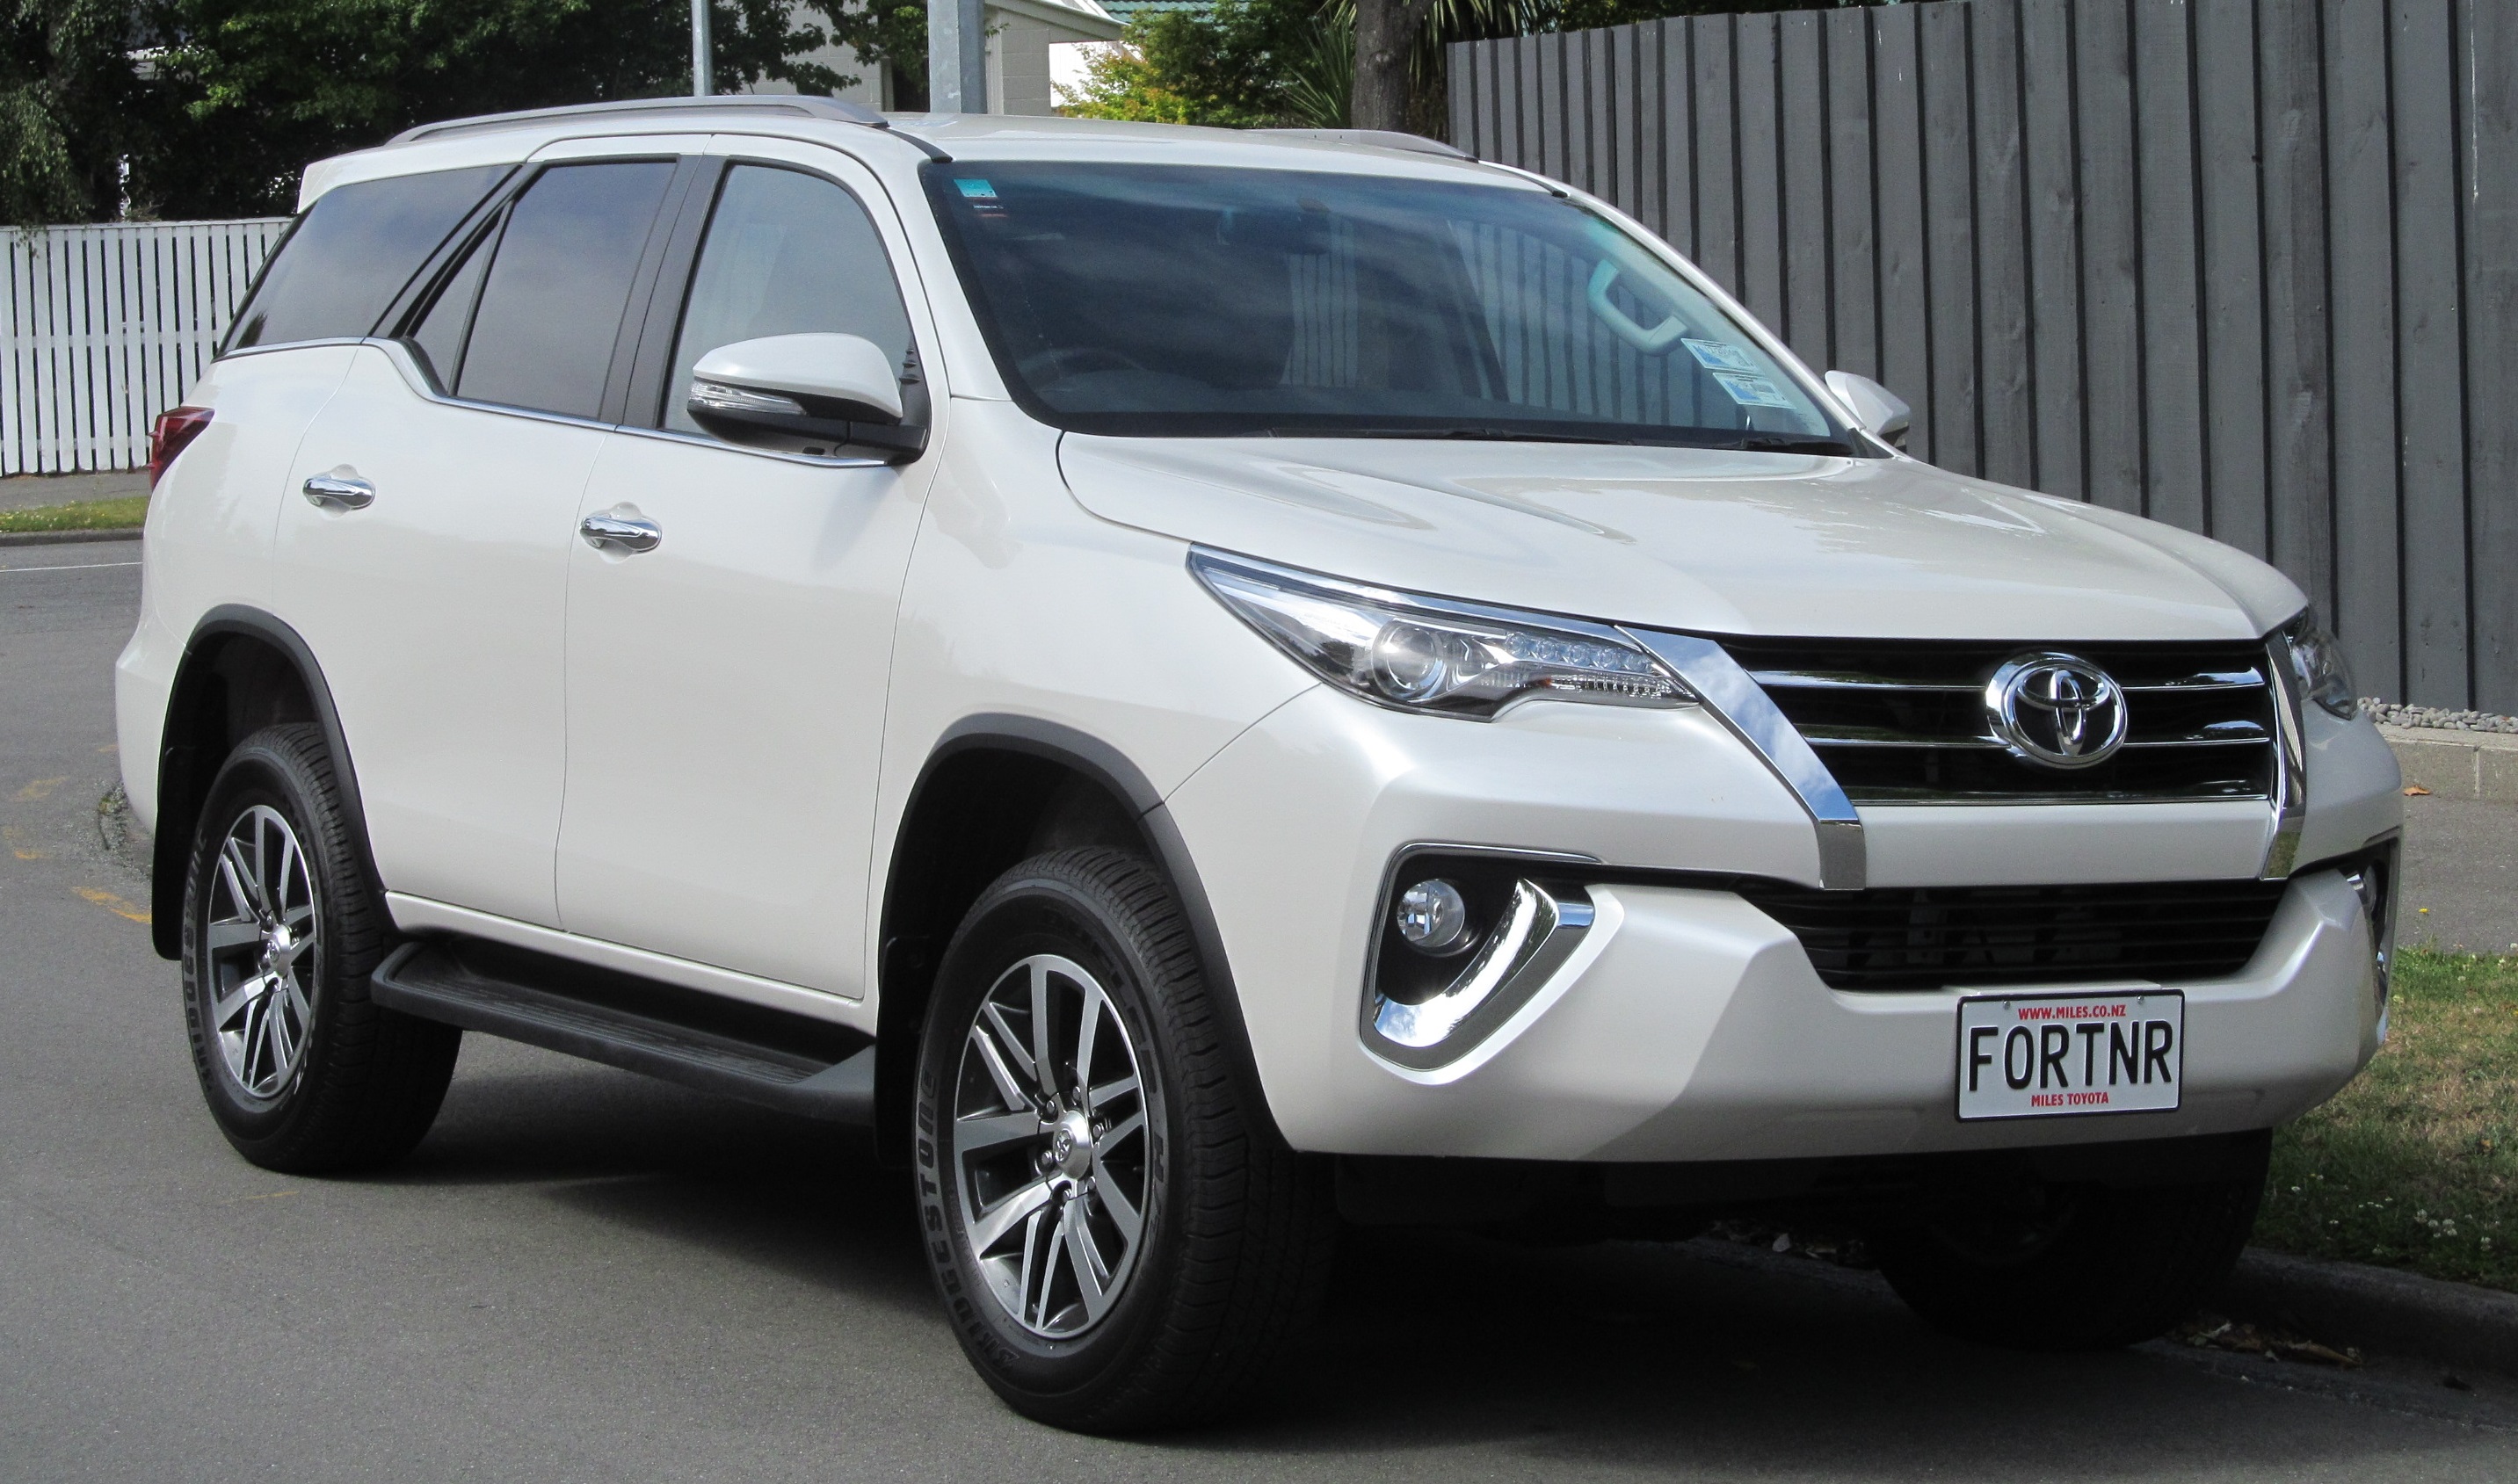 TKM launches limited sports edition of Fortuner SUV